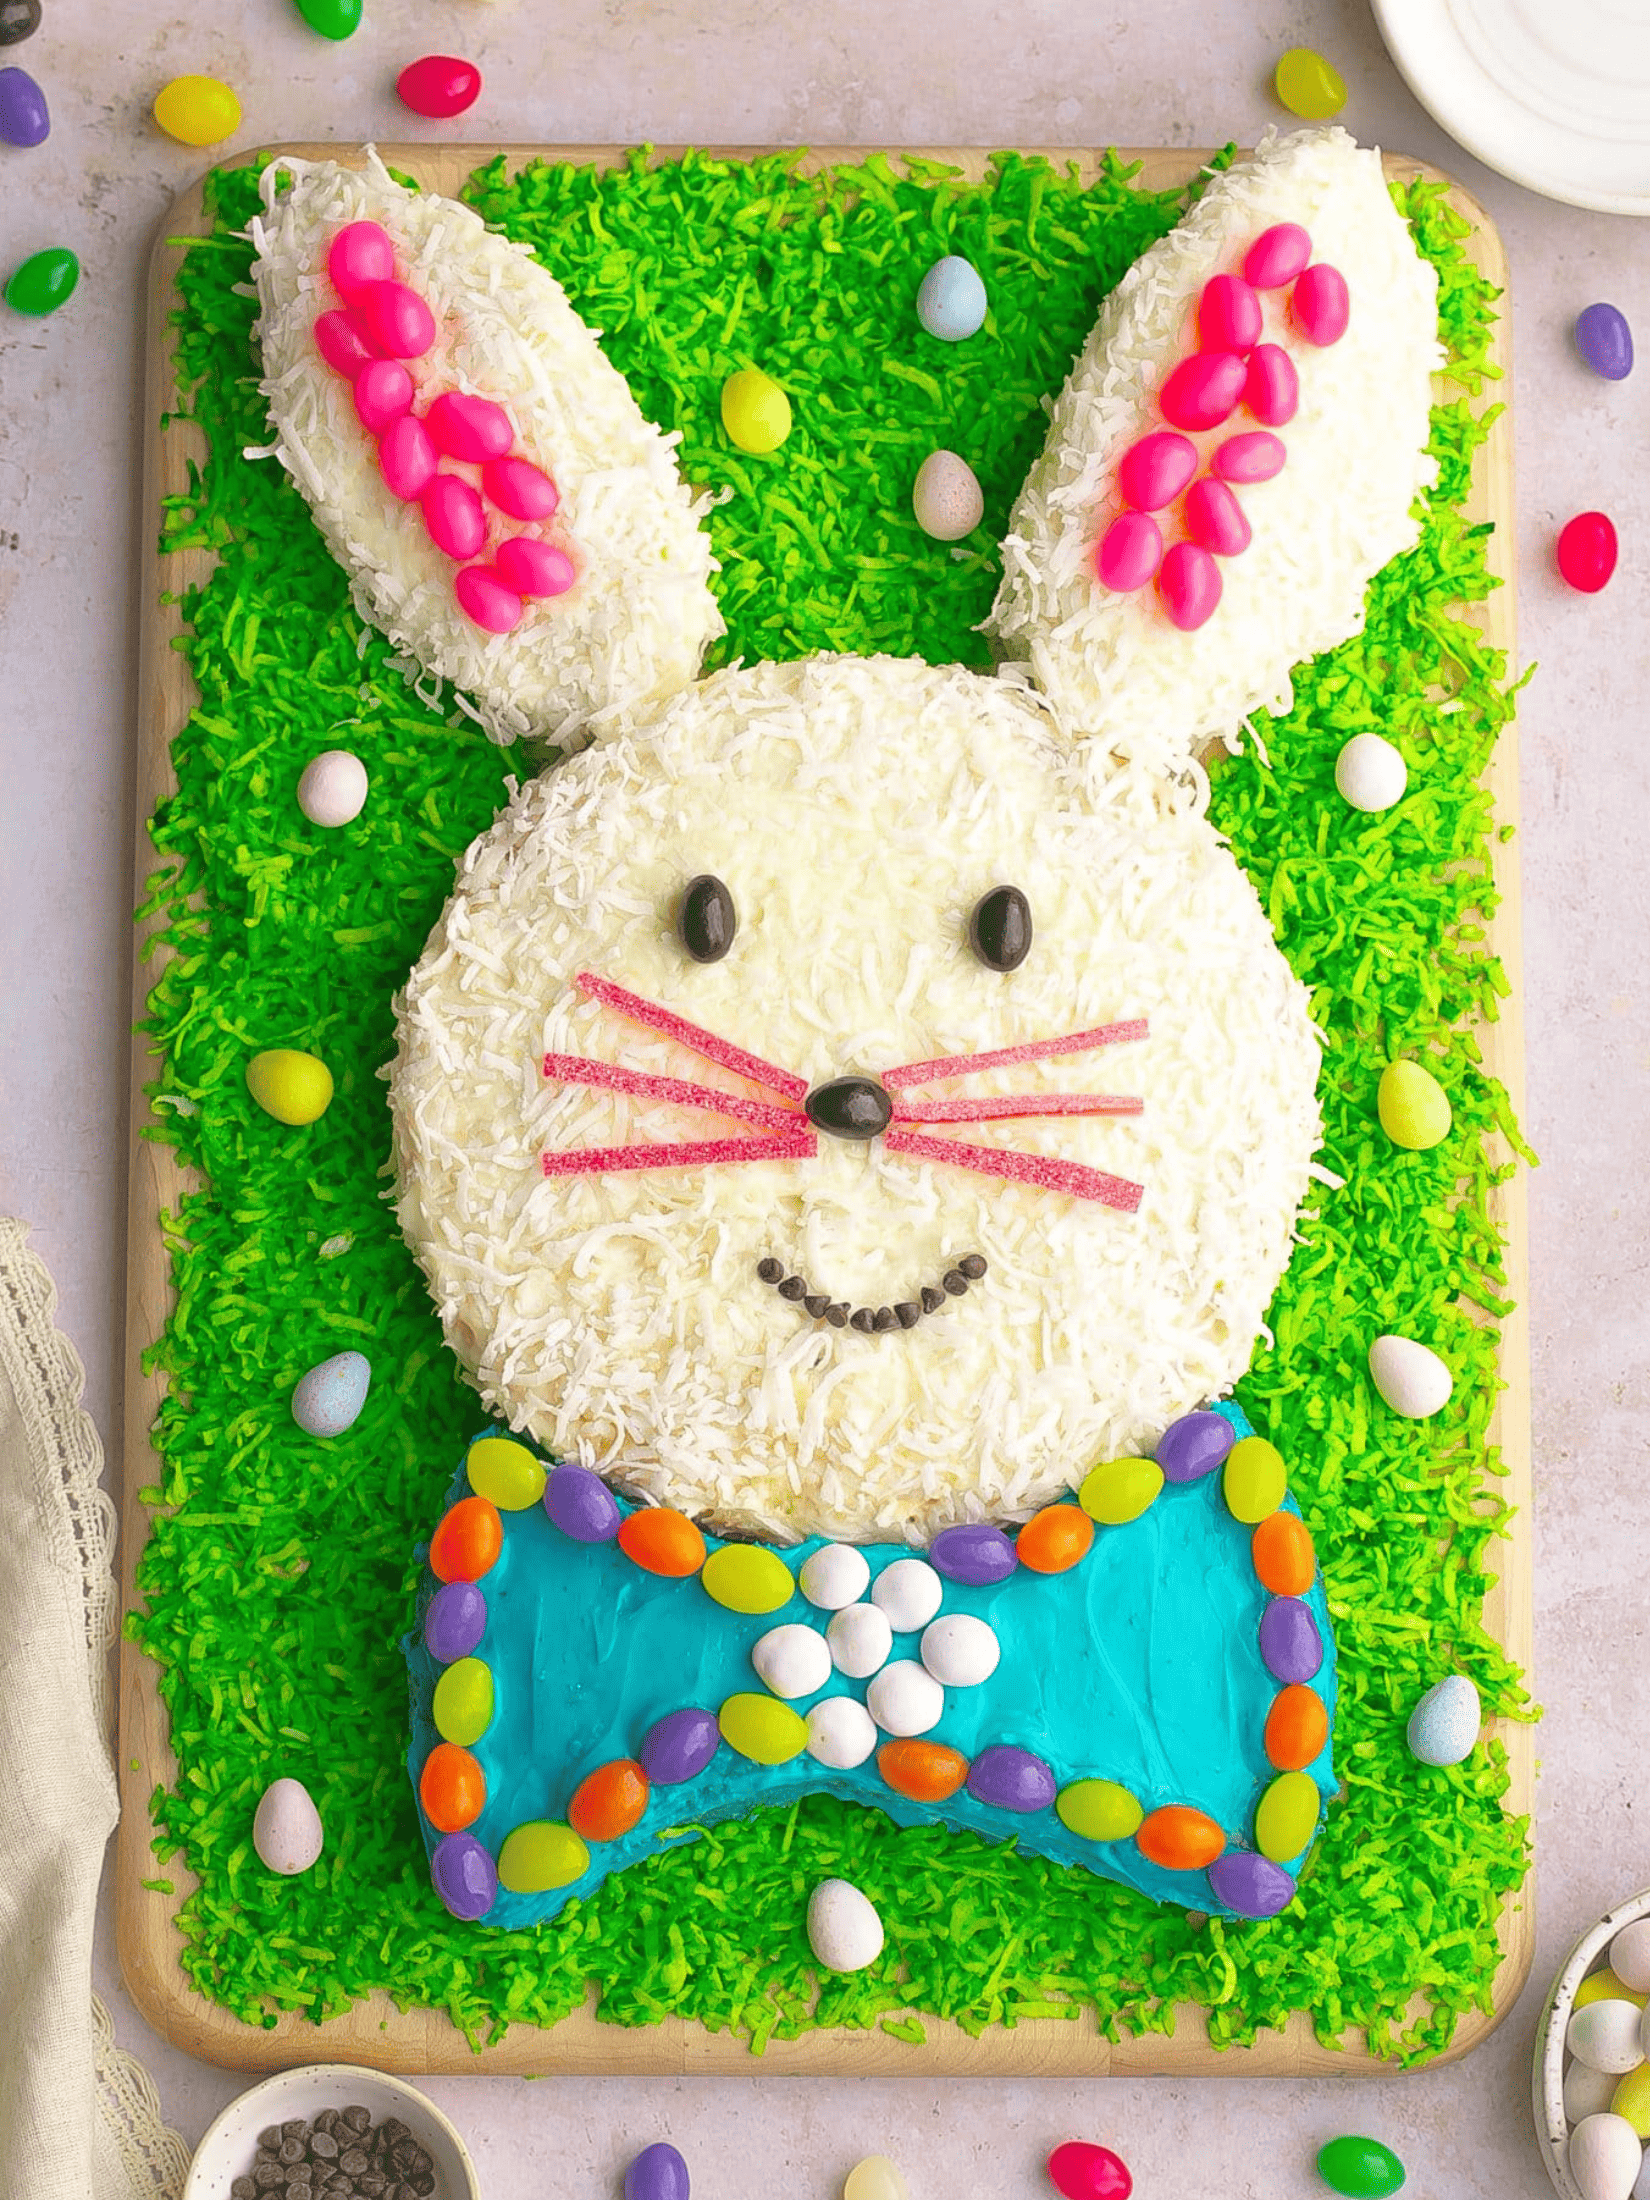 delicious coconut Easter bunny cake surrounded by pastel-colored Easter eggs.